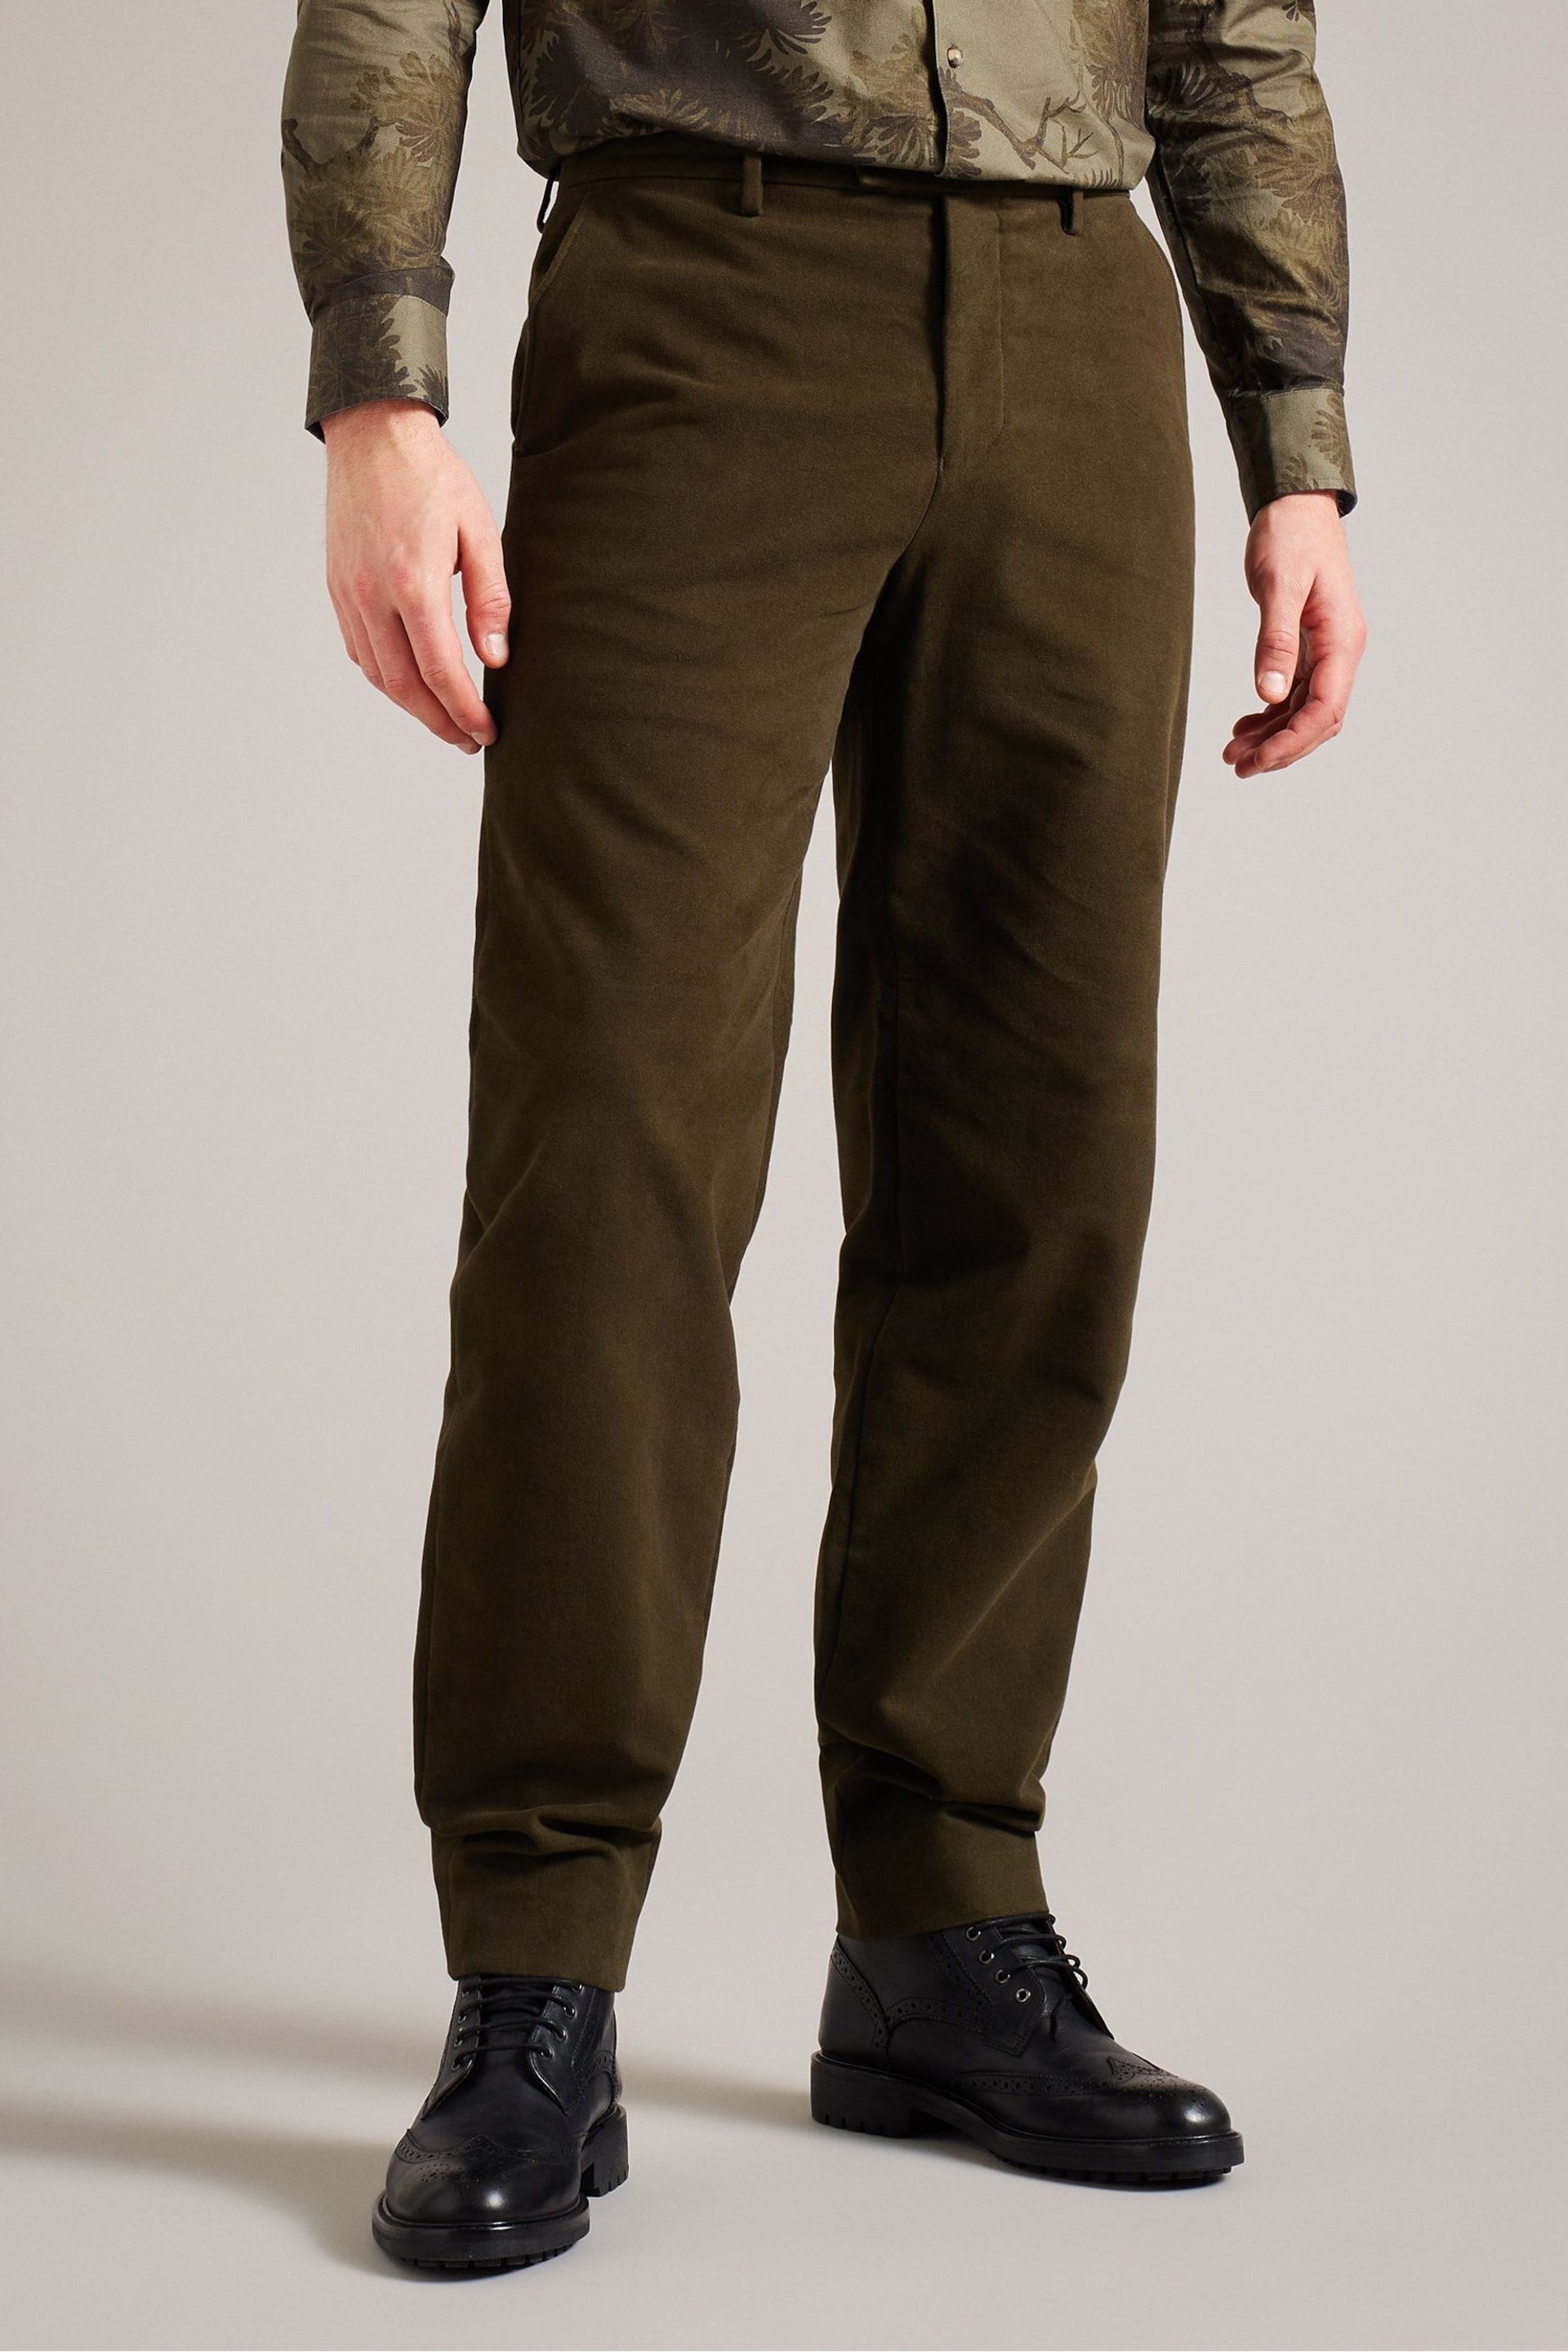 Ted Baker Green Rufust Slim Fit Stretch Moleskin Trousers - Image 1 of 5